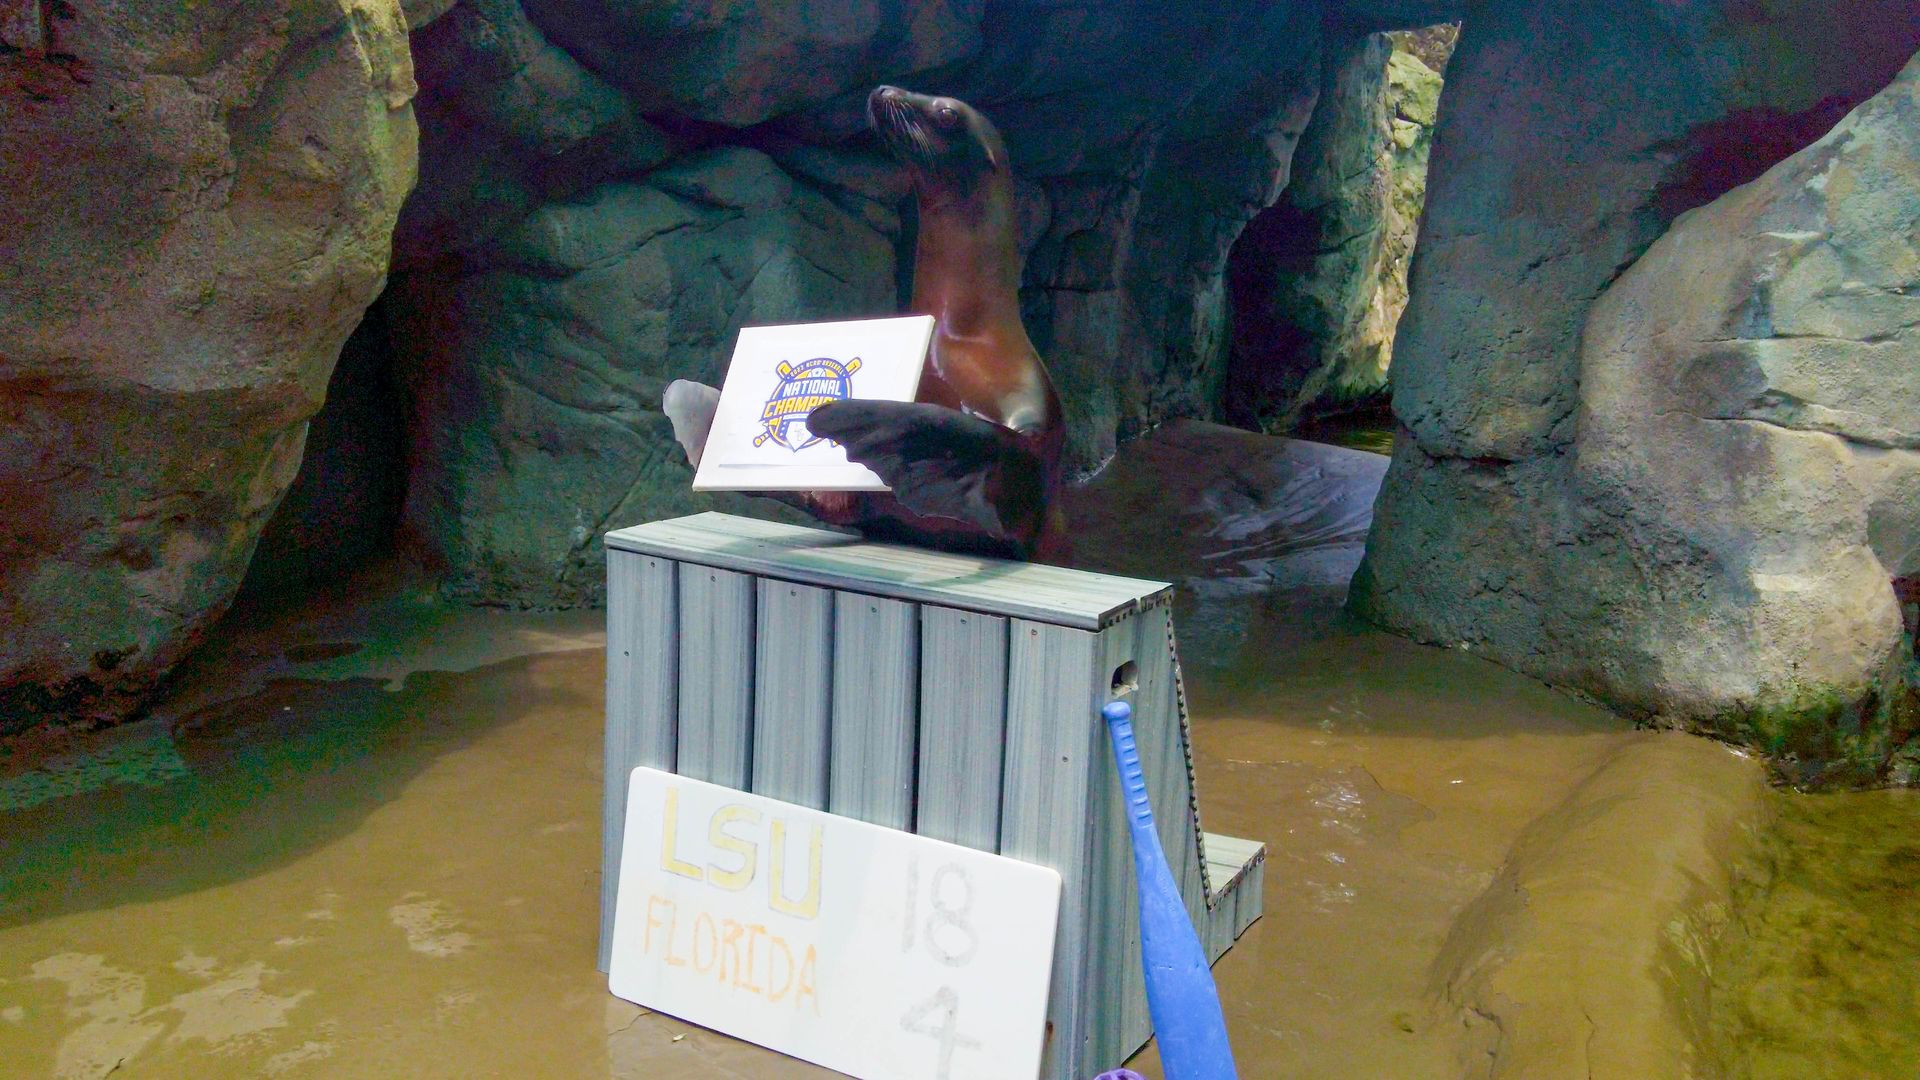 Photo shows a sea lion holding an LSU sign in the habitat at Audubon Zoo in New Orleans